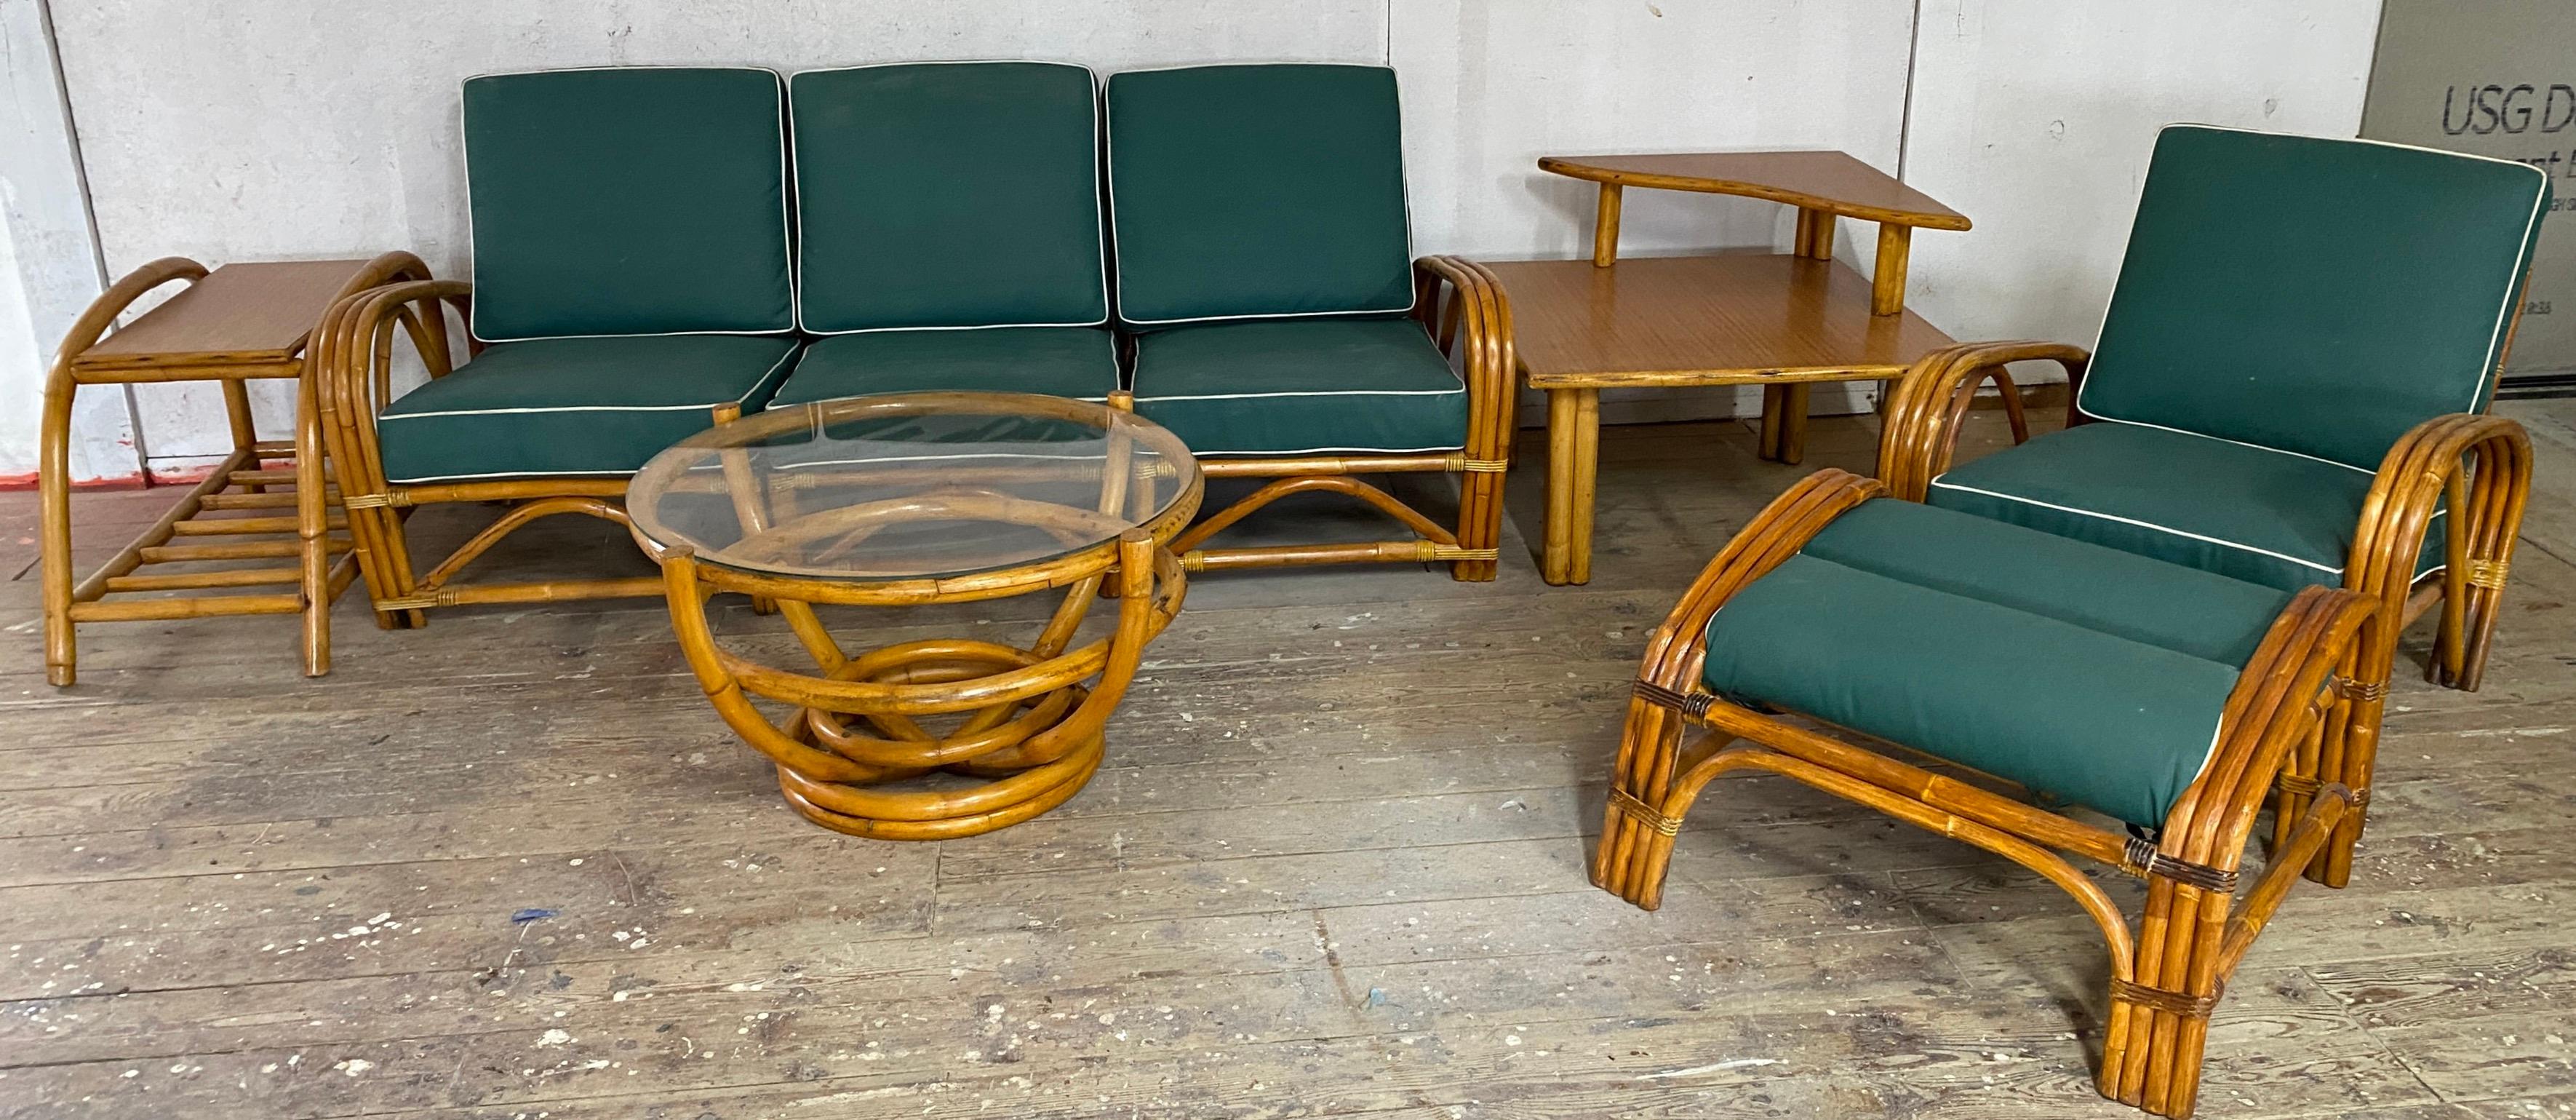 6 Piece Art Deco Bentwood Bamboo Wicker Seating Ensemble For Sale 7